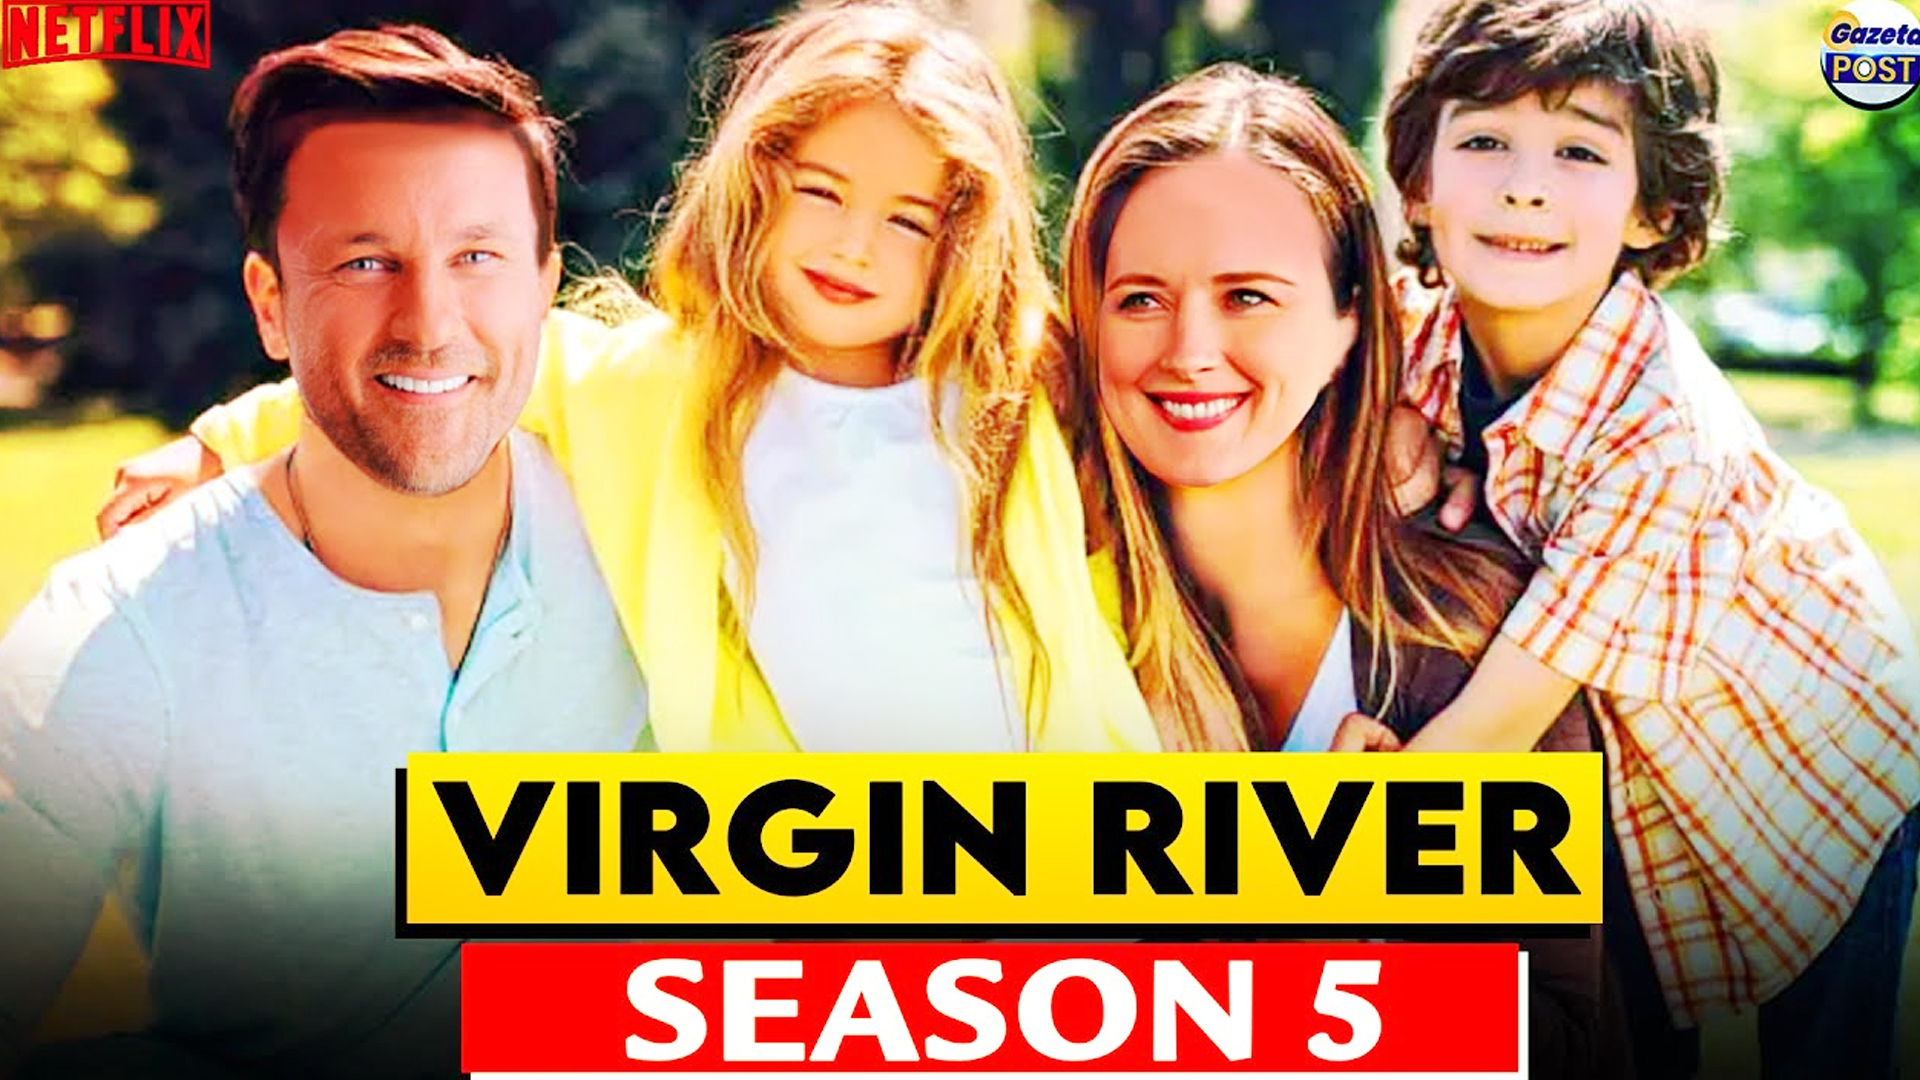 Virgin River Season 5 Exciting Details Know Here!!!